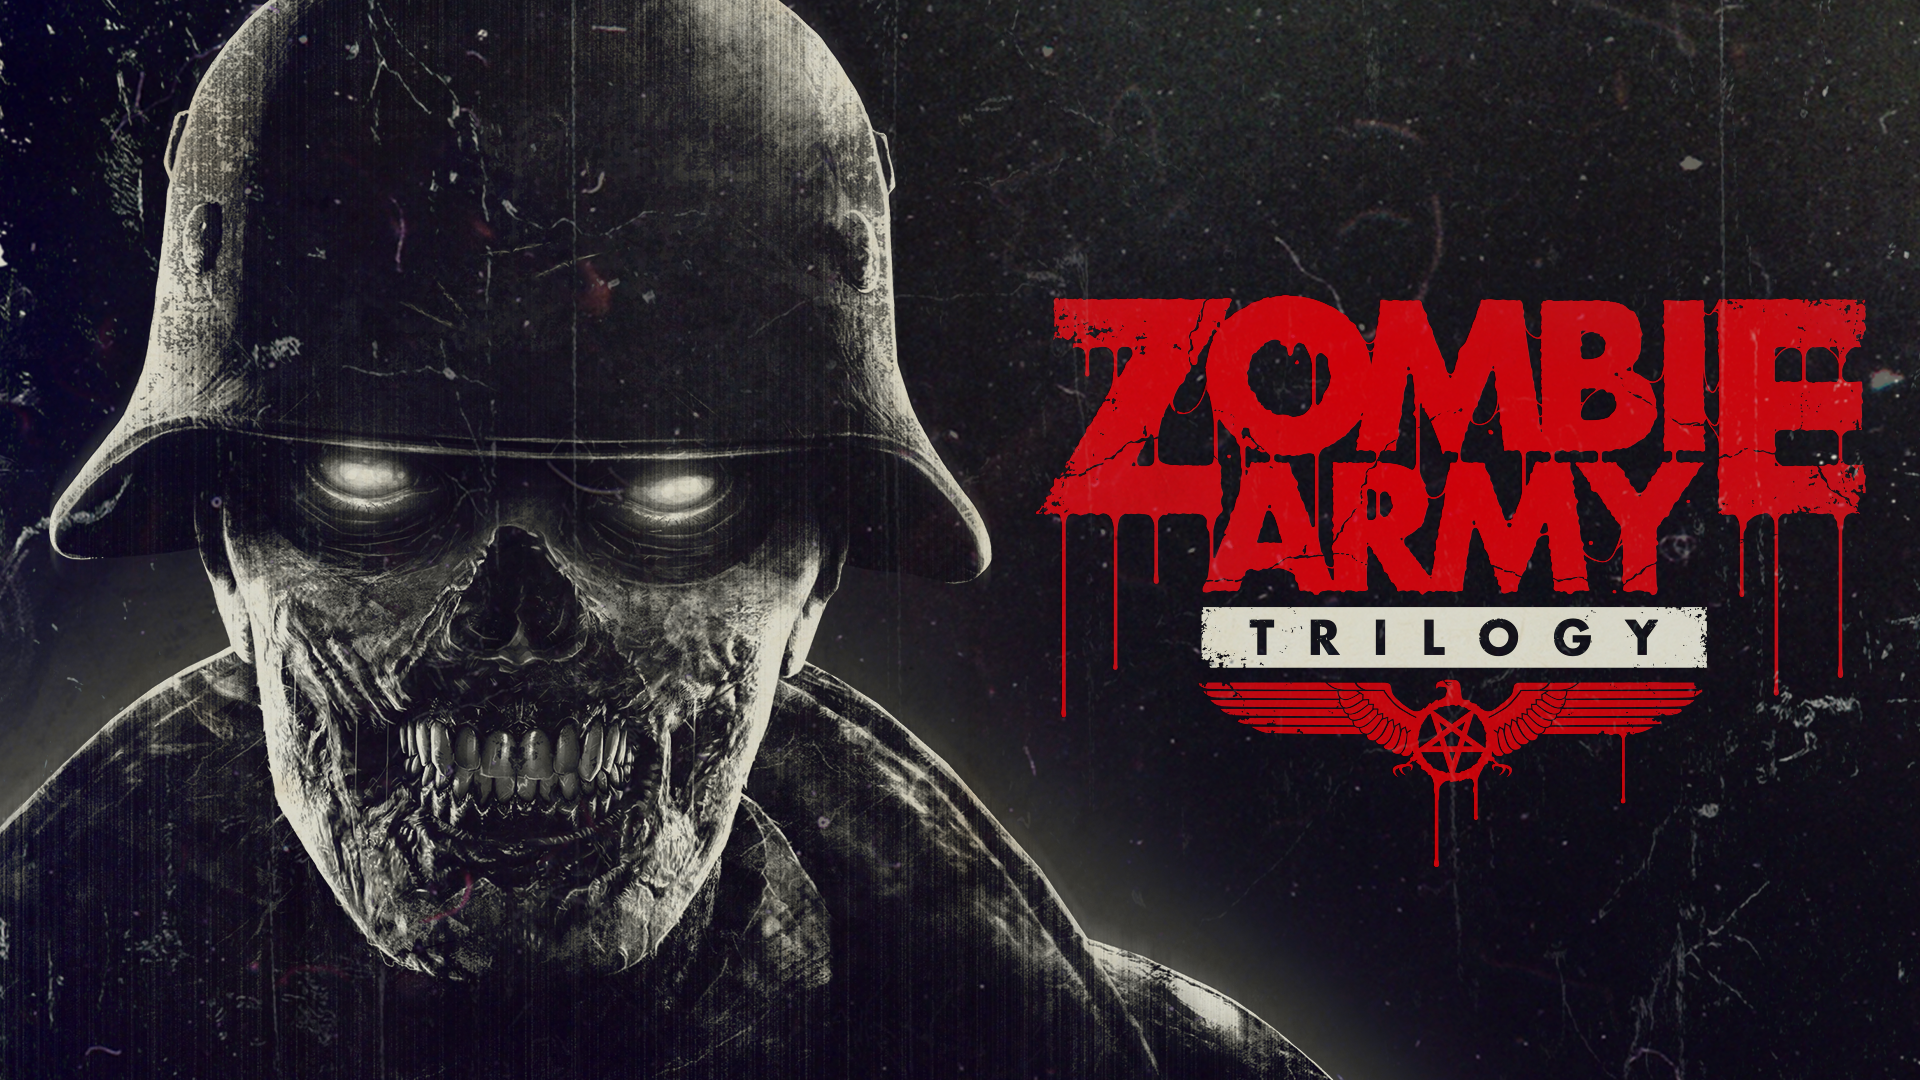 High Resolution Wallpaper | Zombie Army Trilogy 1920x1080 px